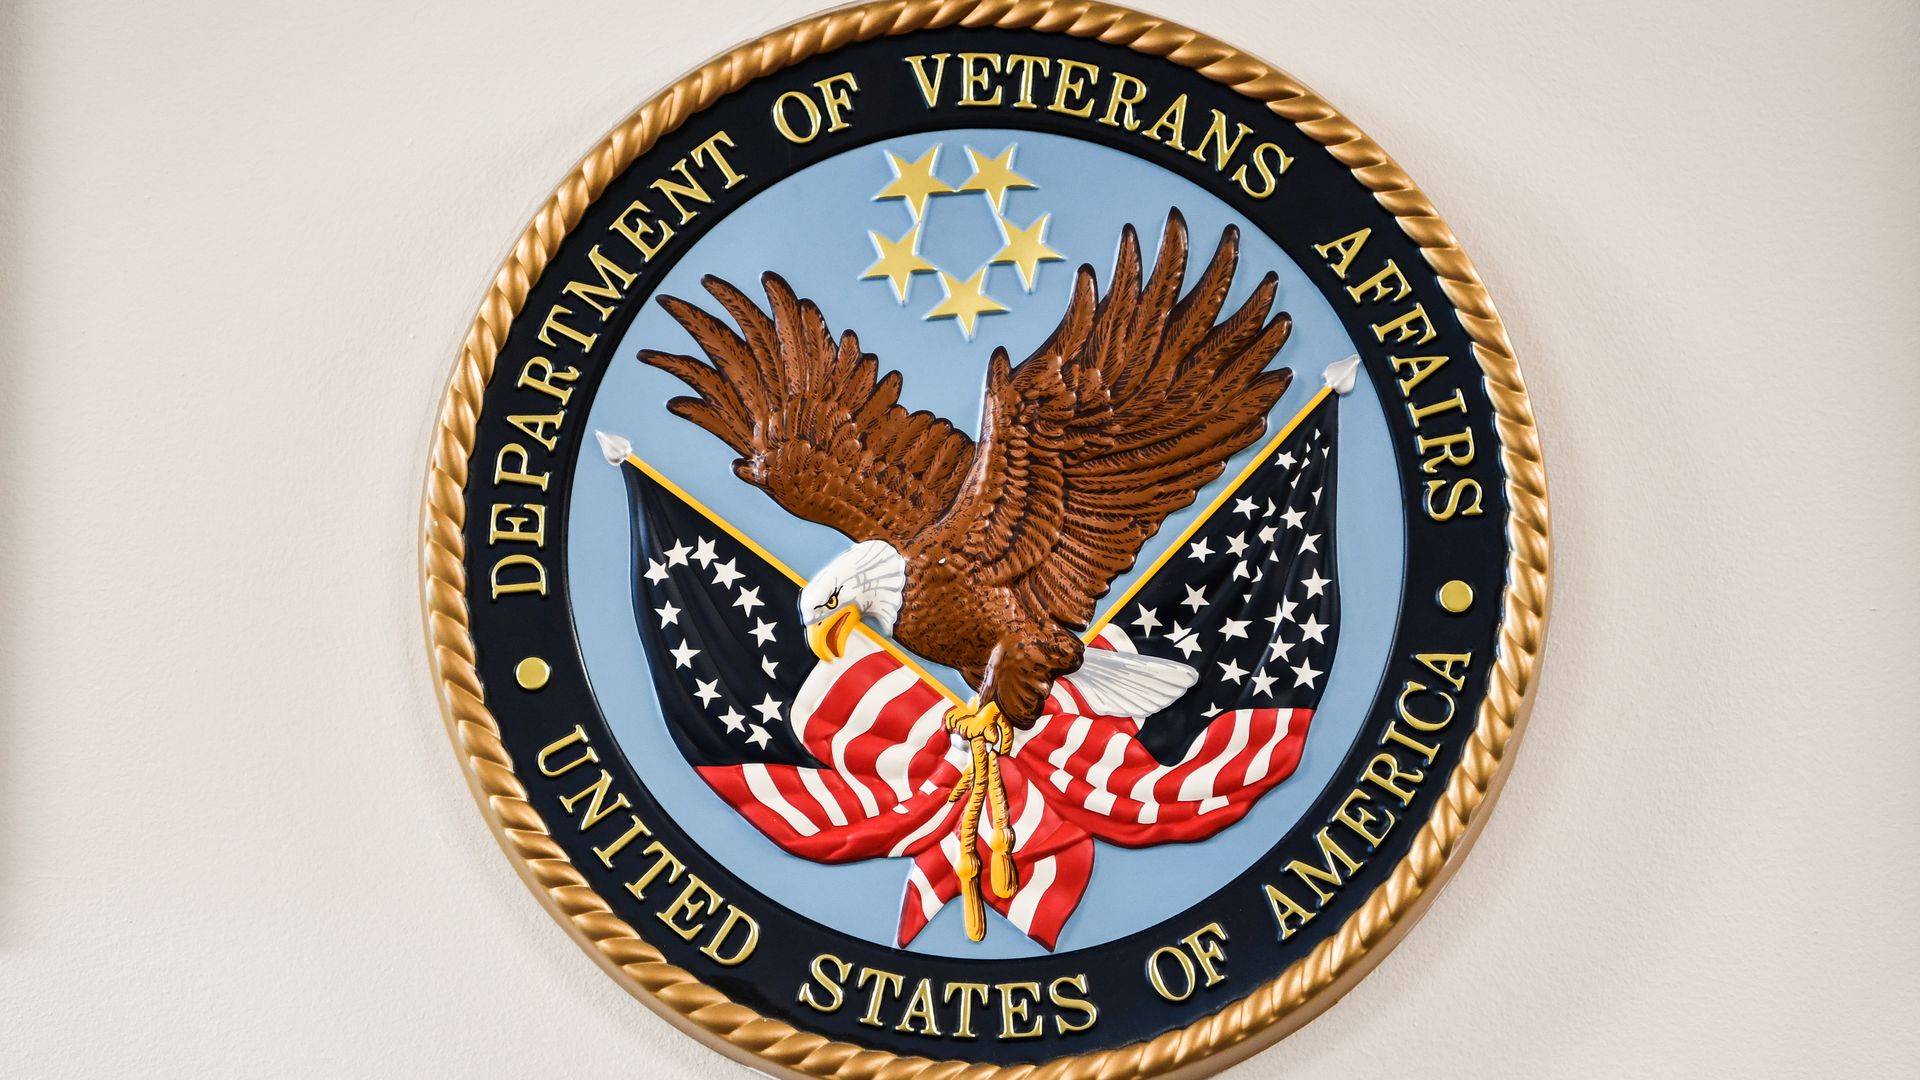 The Department of Veterans Affairs seal.